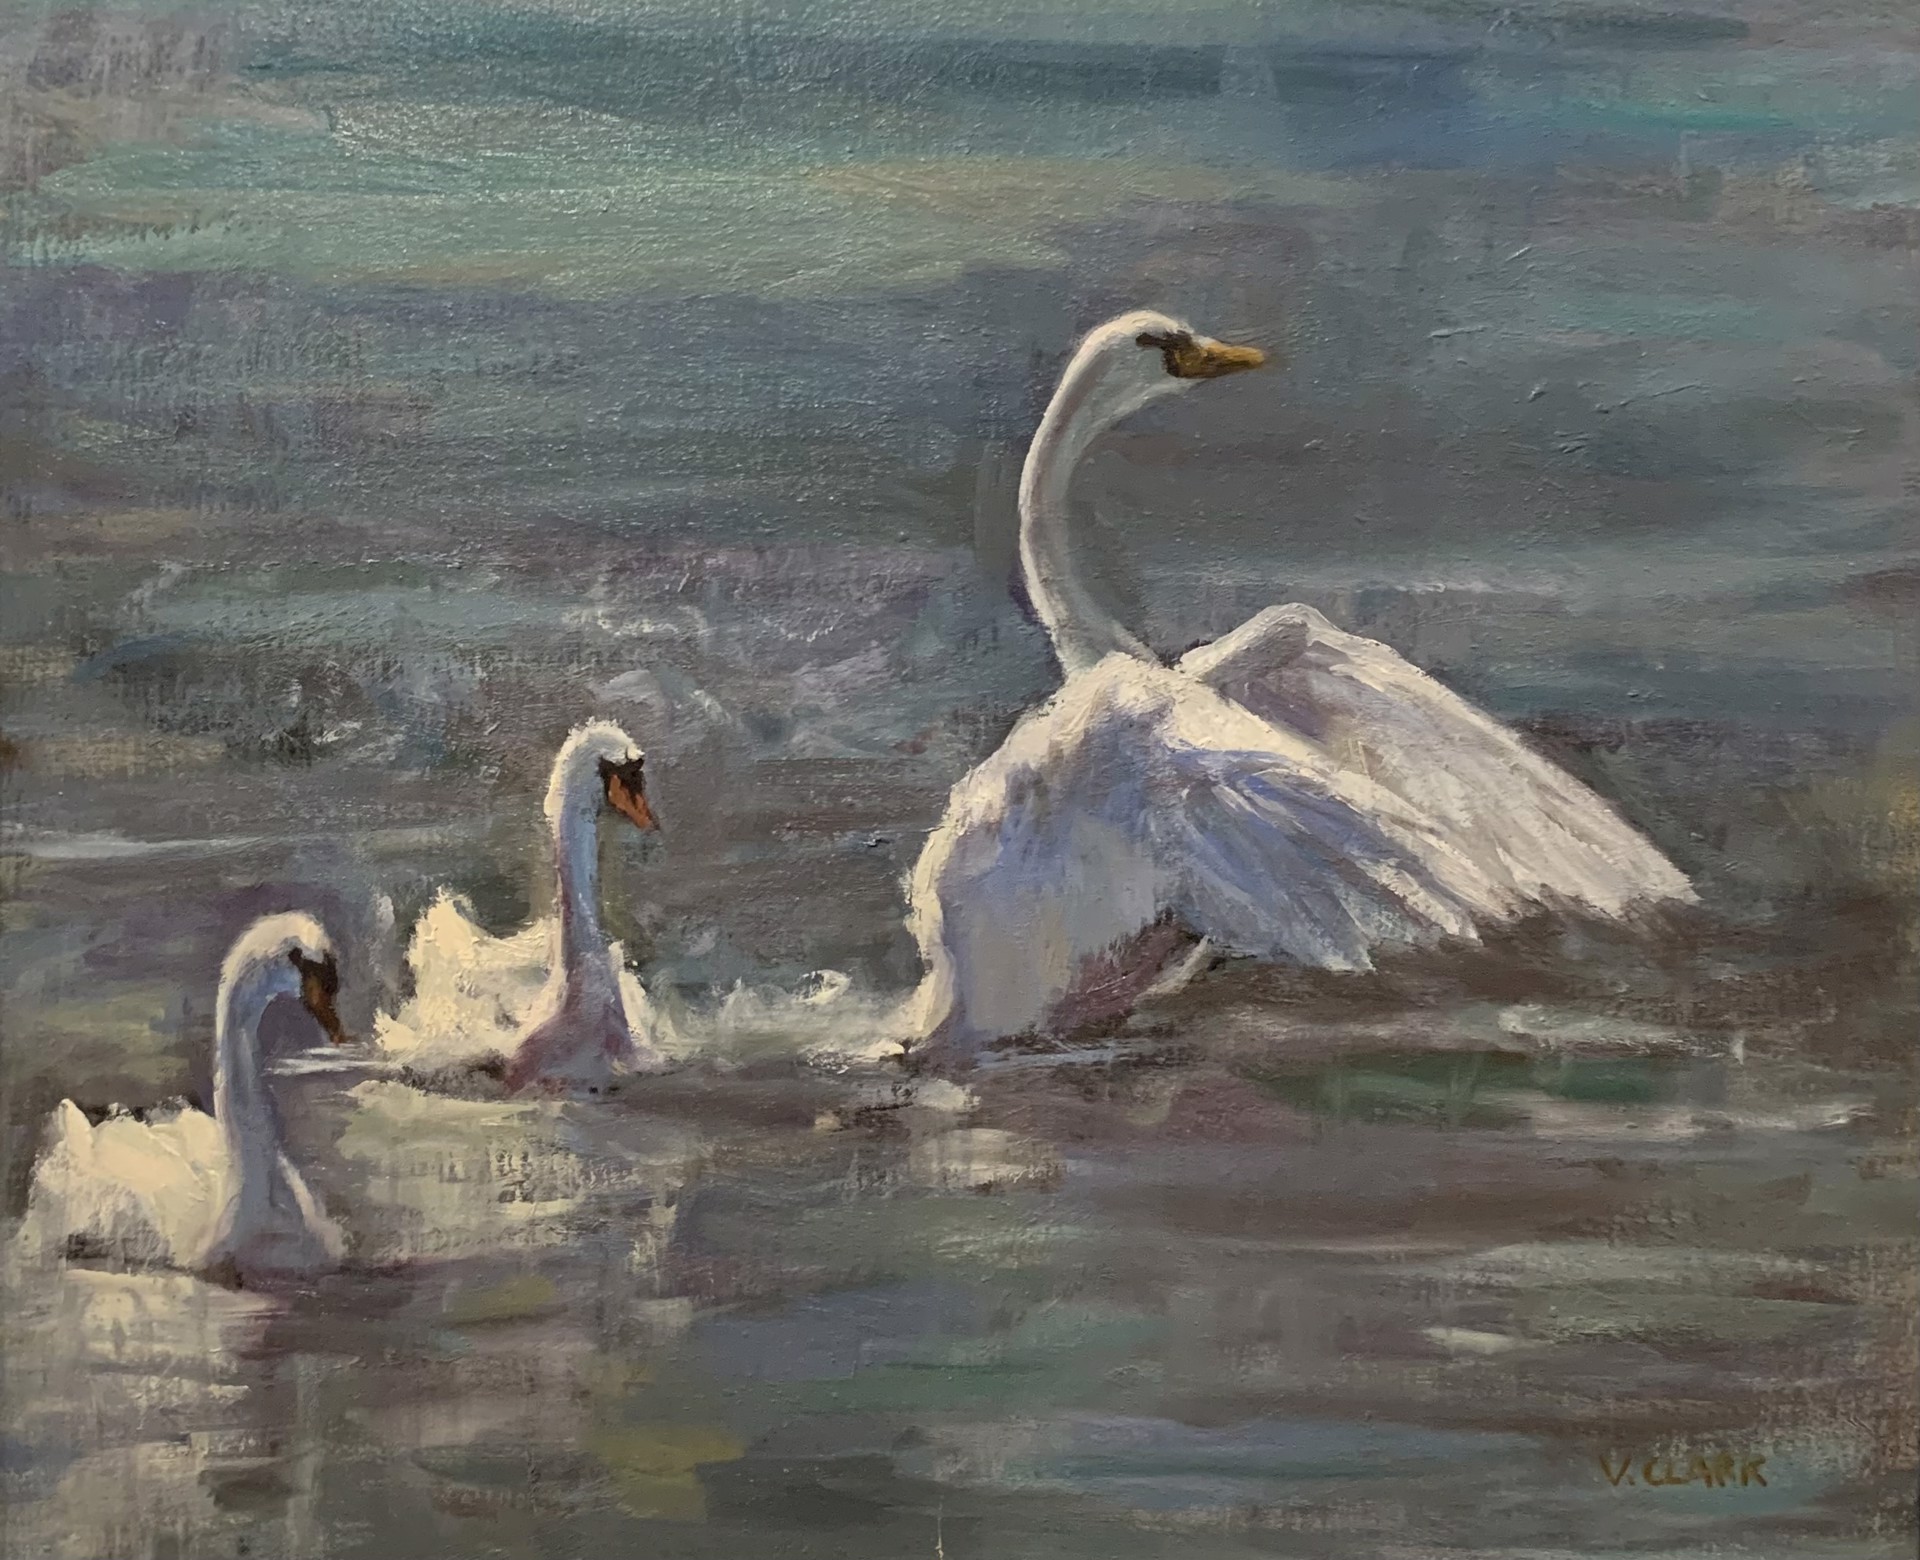 Swans by Veronica Clark